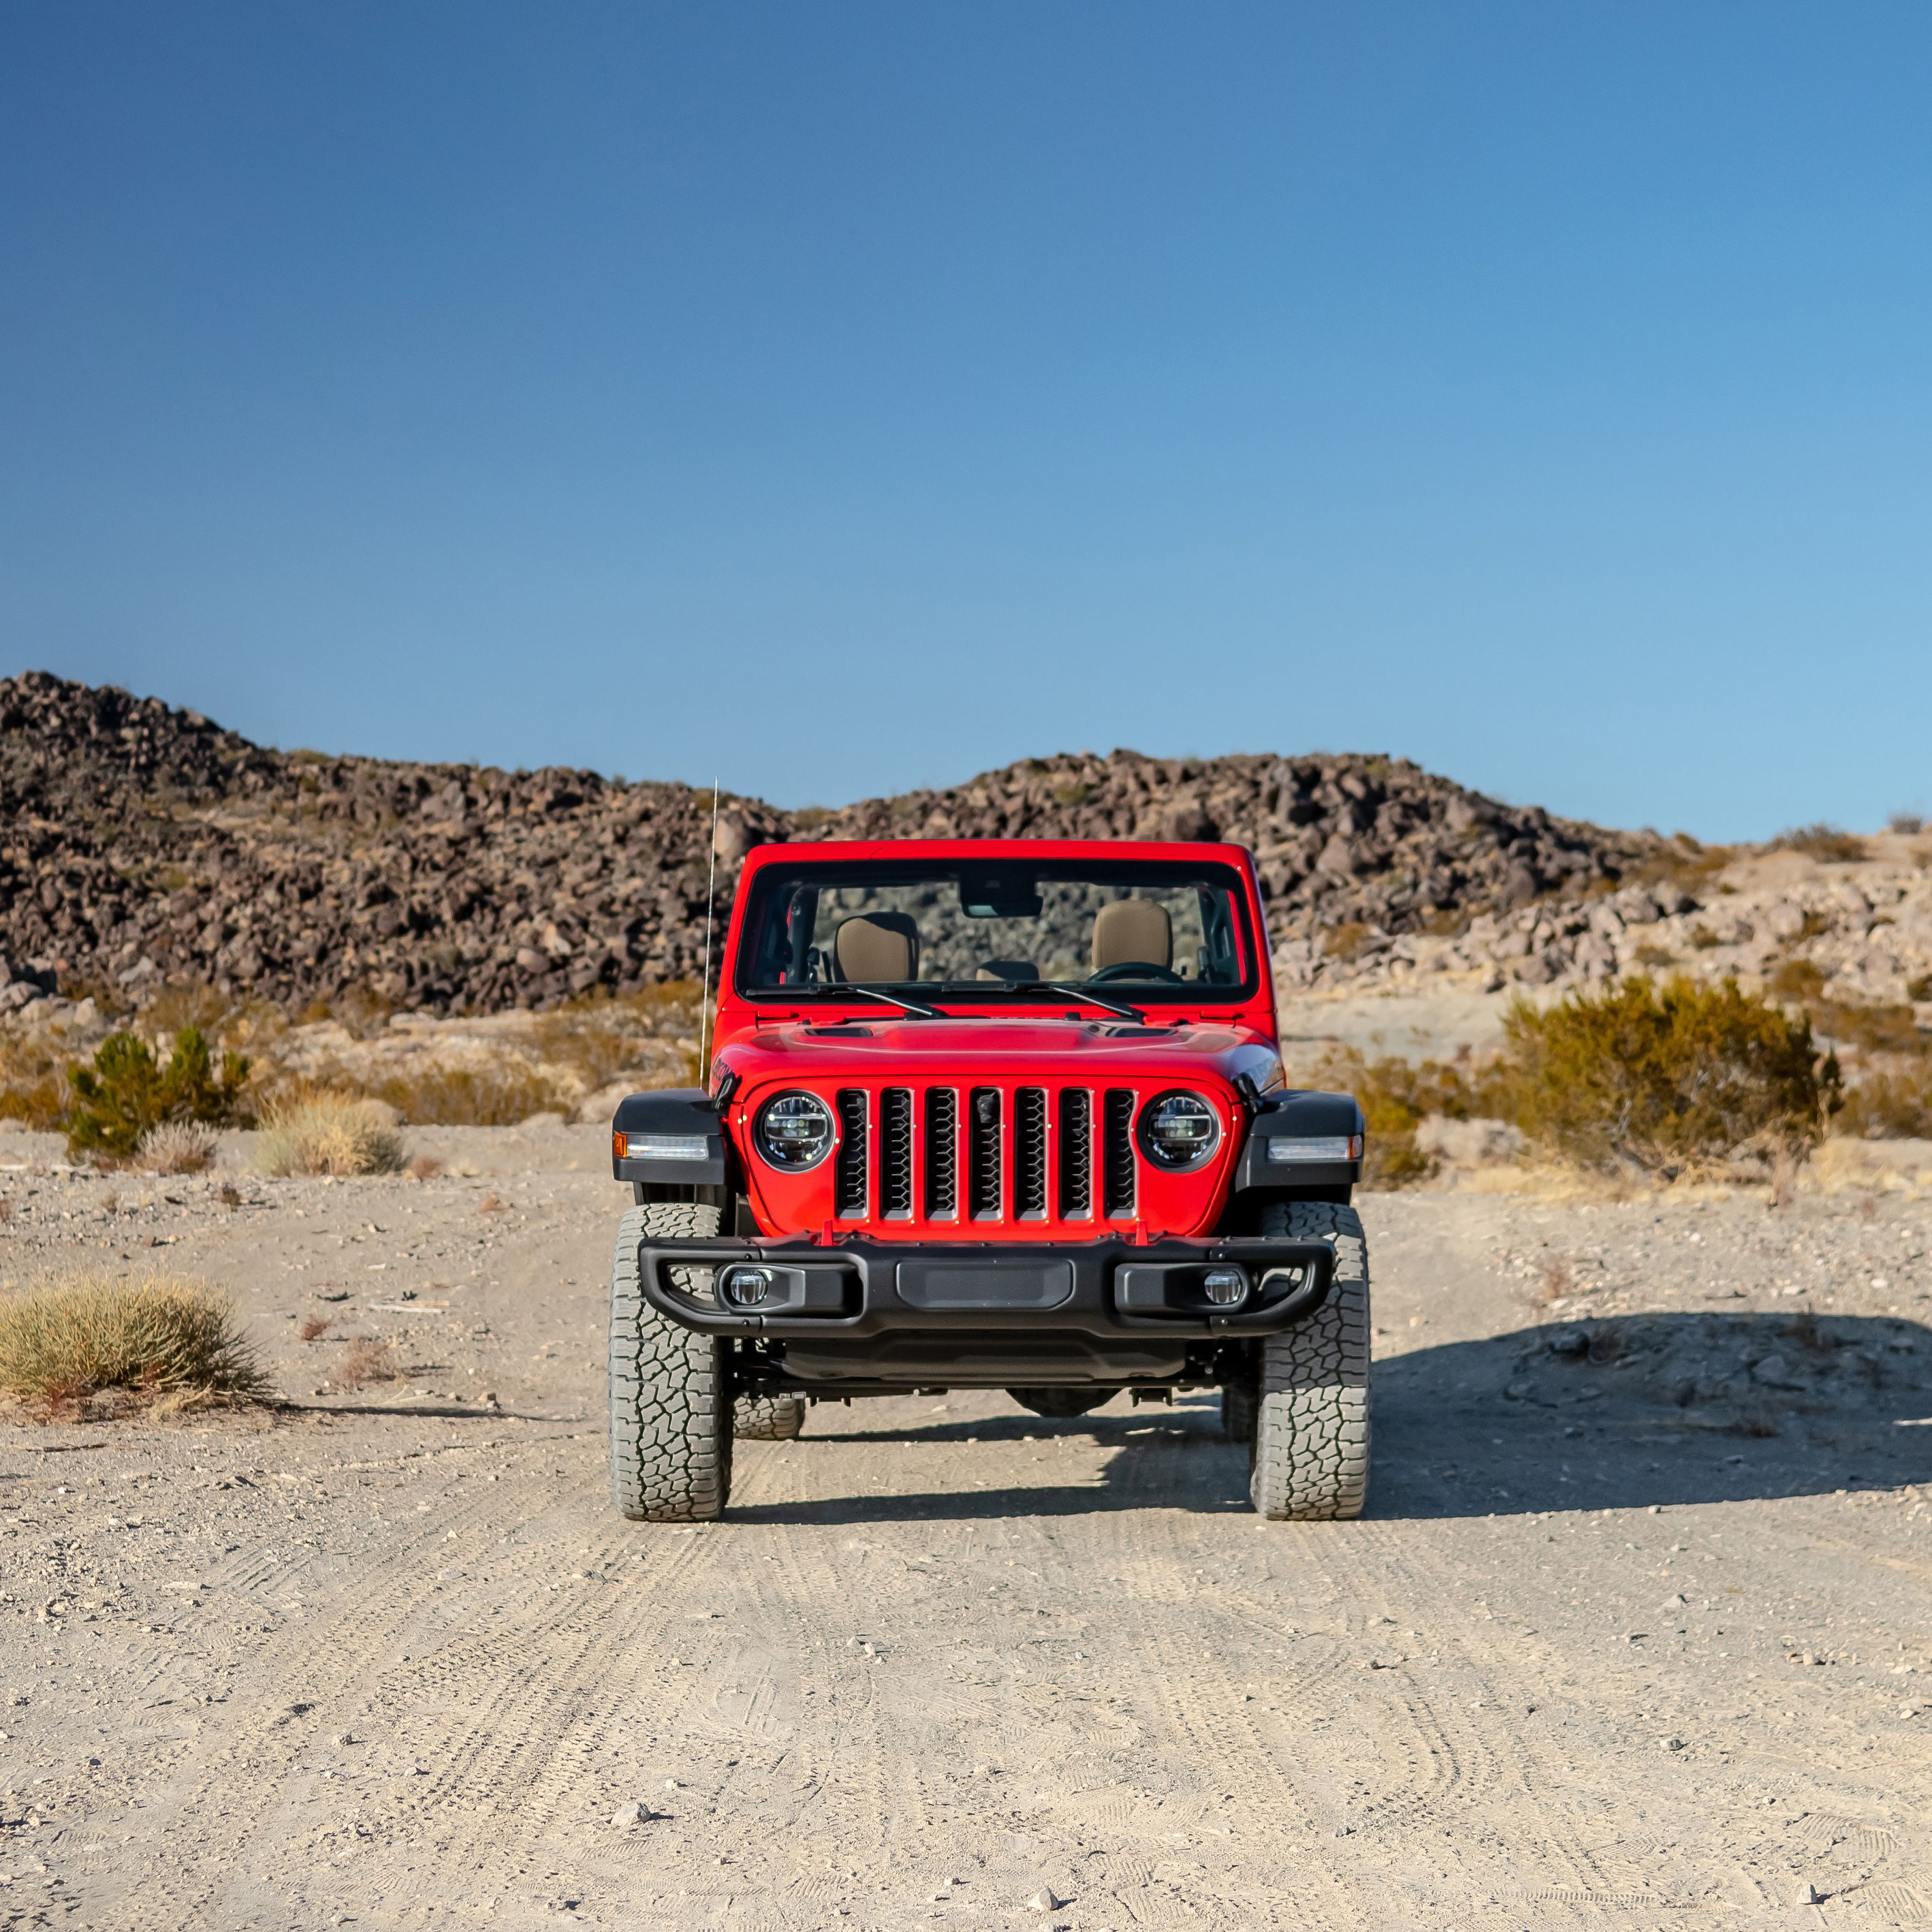 Vehicle, Automotive tire, Regularity rally, Tire, Jeep, Car, Off-road vehicle, Jeep wrangler, Off-roading, Wadi, 